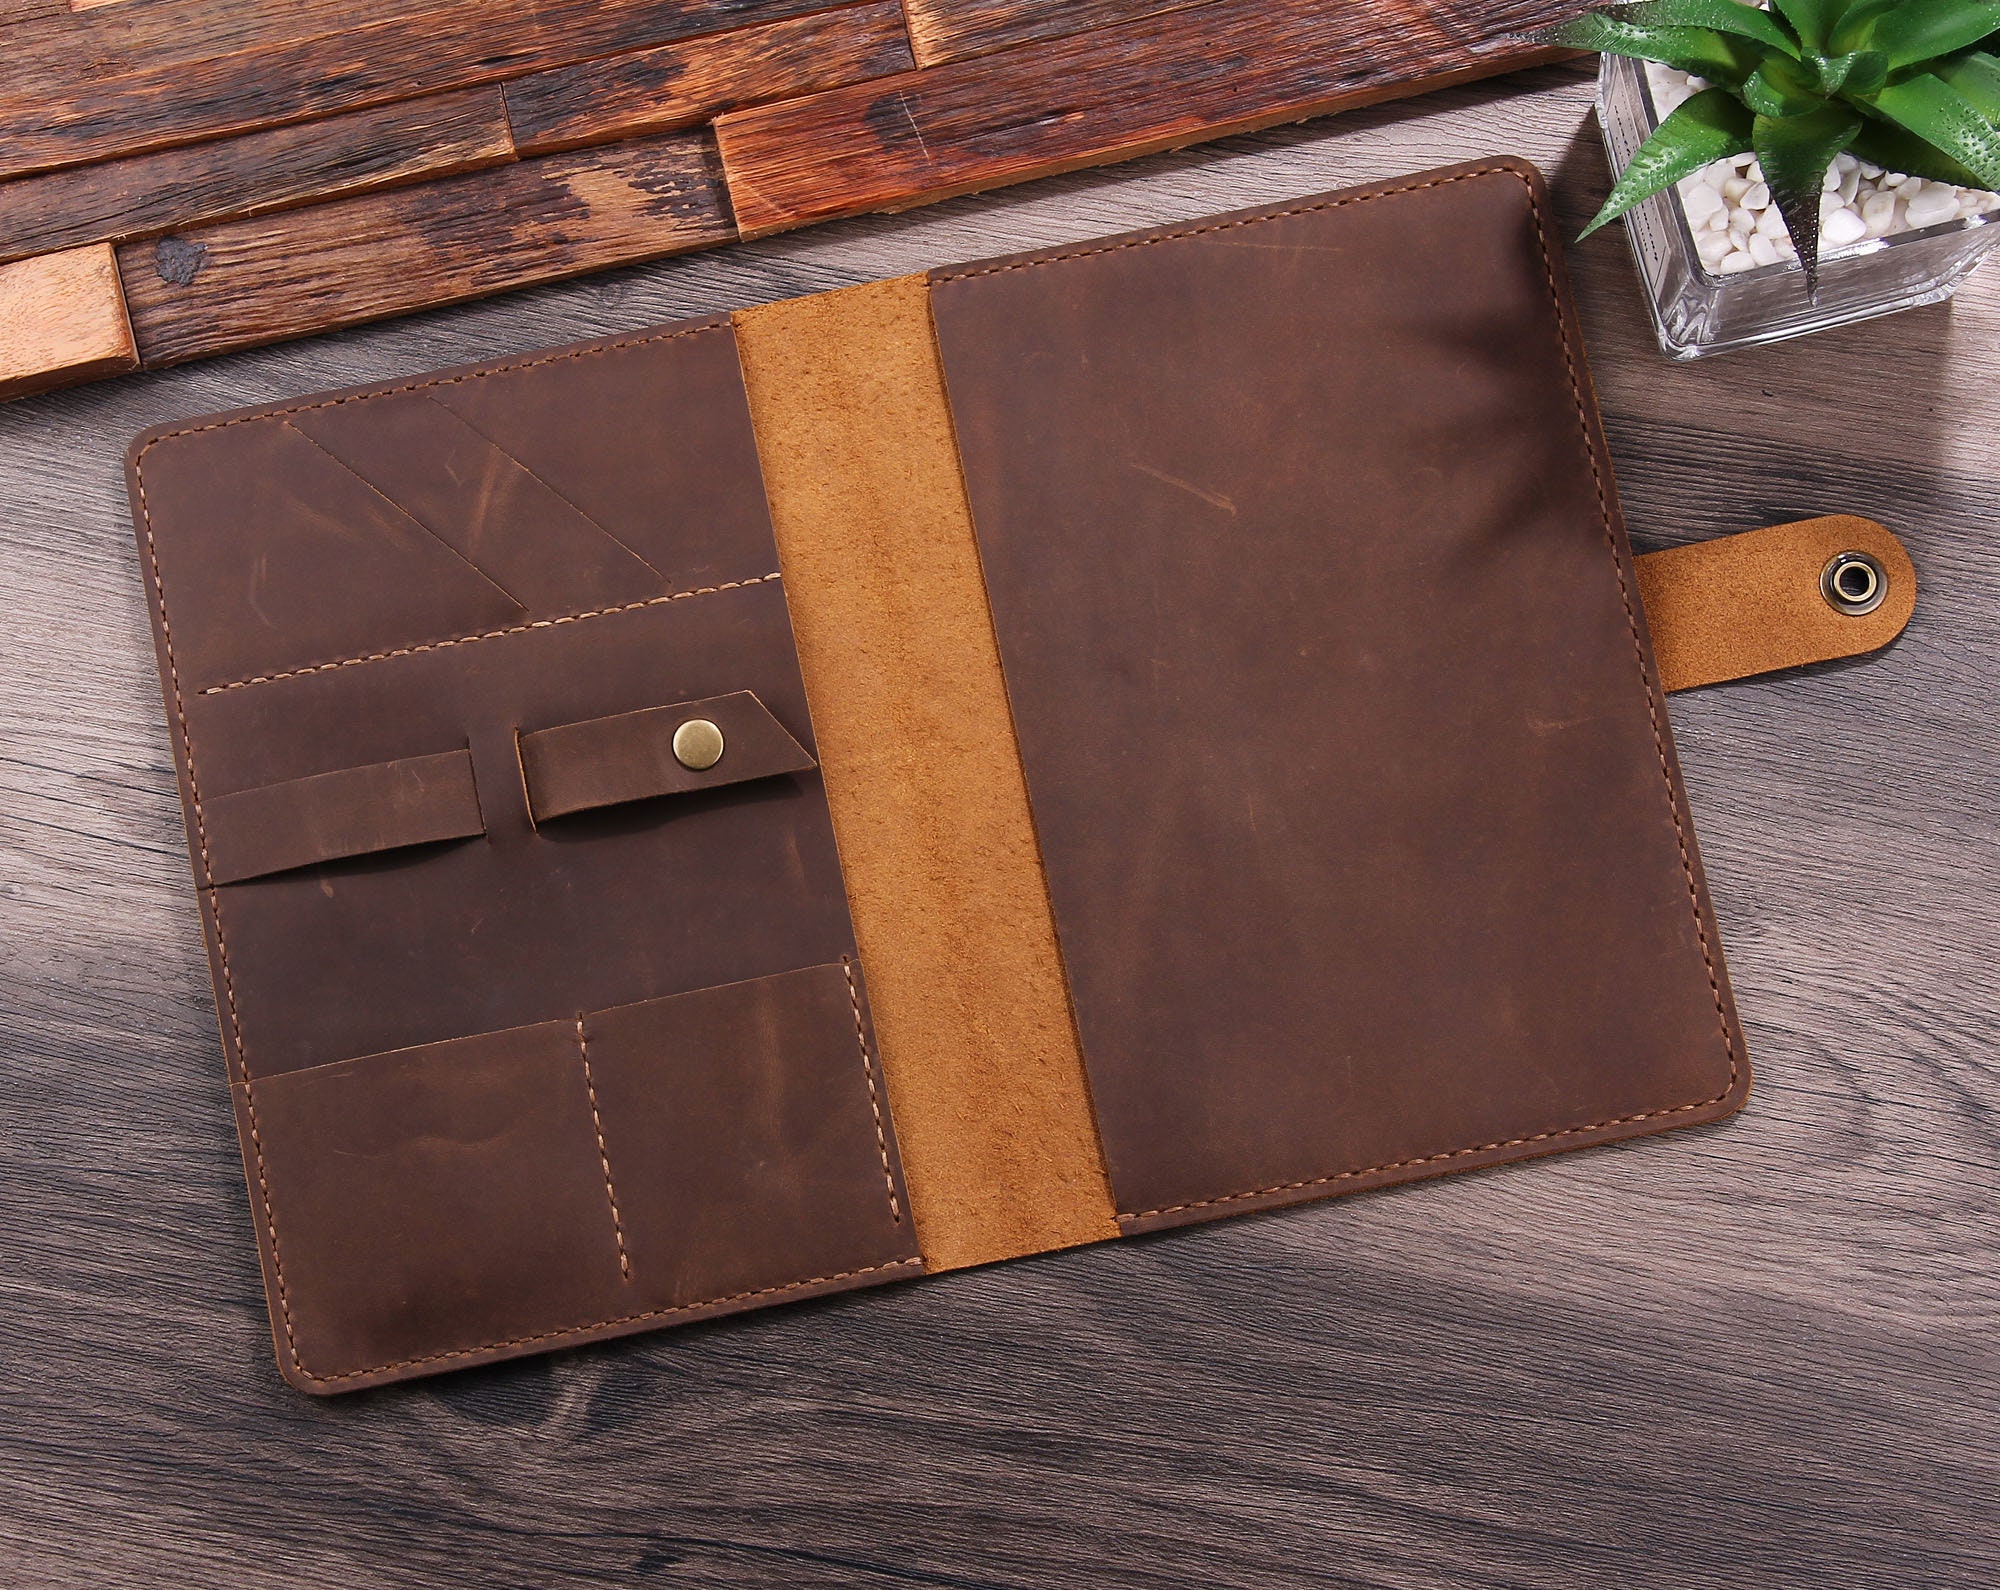 Leather Cover for Rocketbook Smart Reusable Notebook, Personalized Leather  Rocketbook Everlast Cover, Fit for Executive Size 6x8.8 